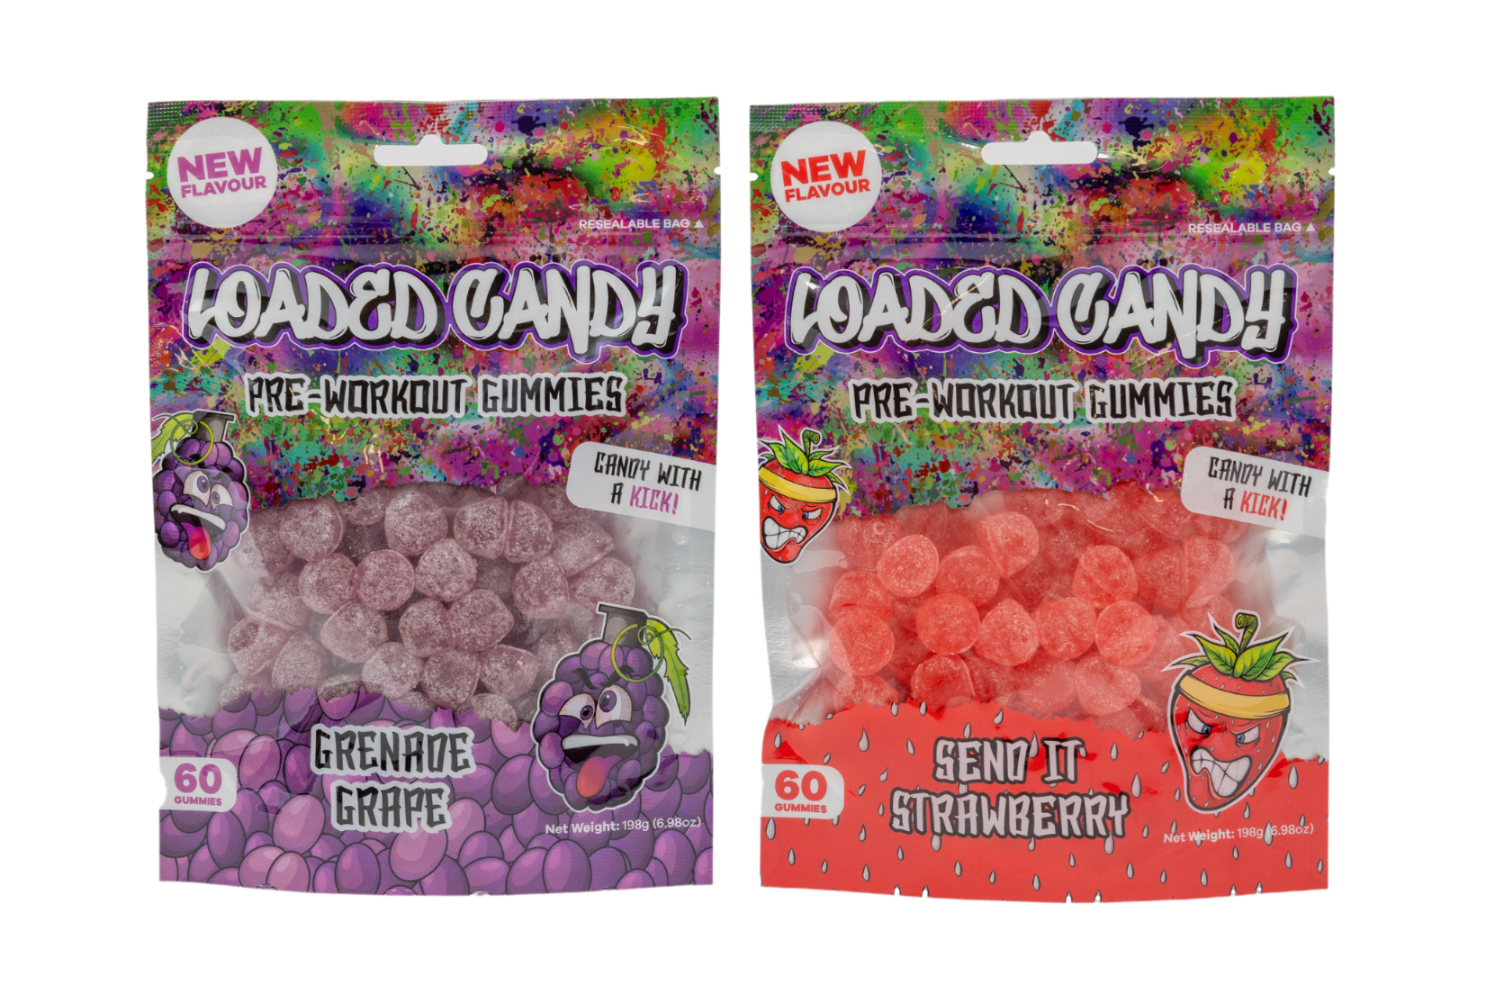 Grenade Grape & Send It Strawberry Pre-Workout Gummy (DUO PACK)